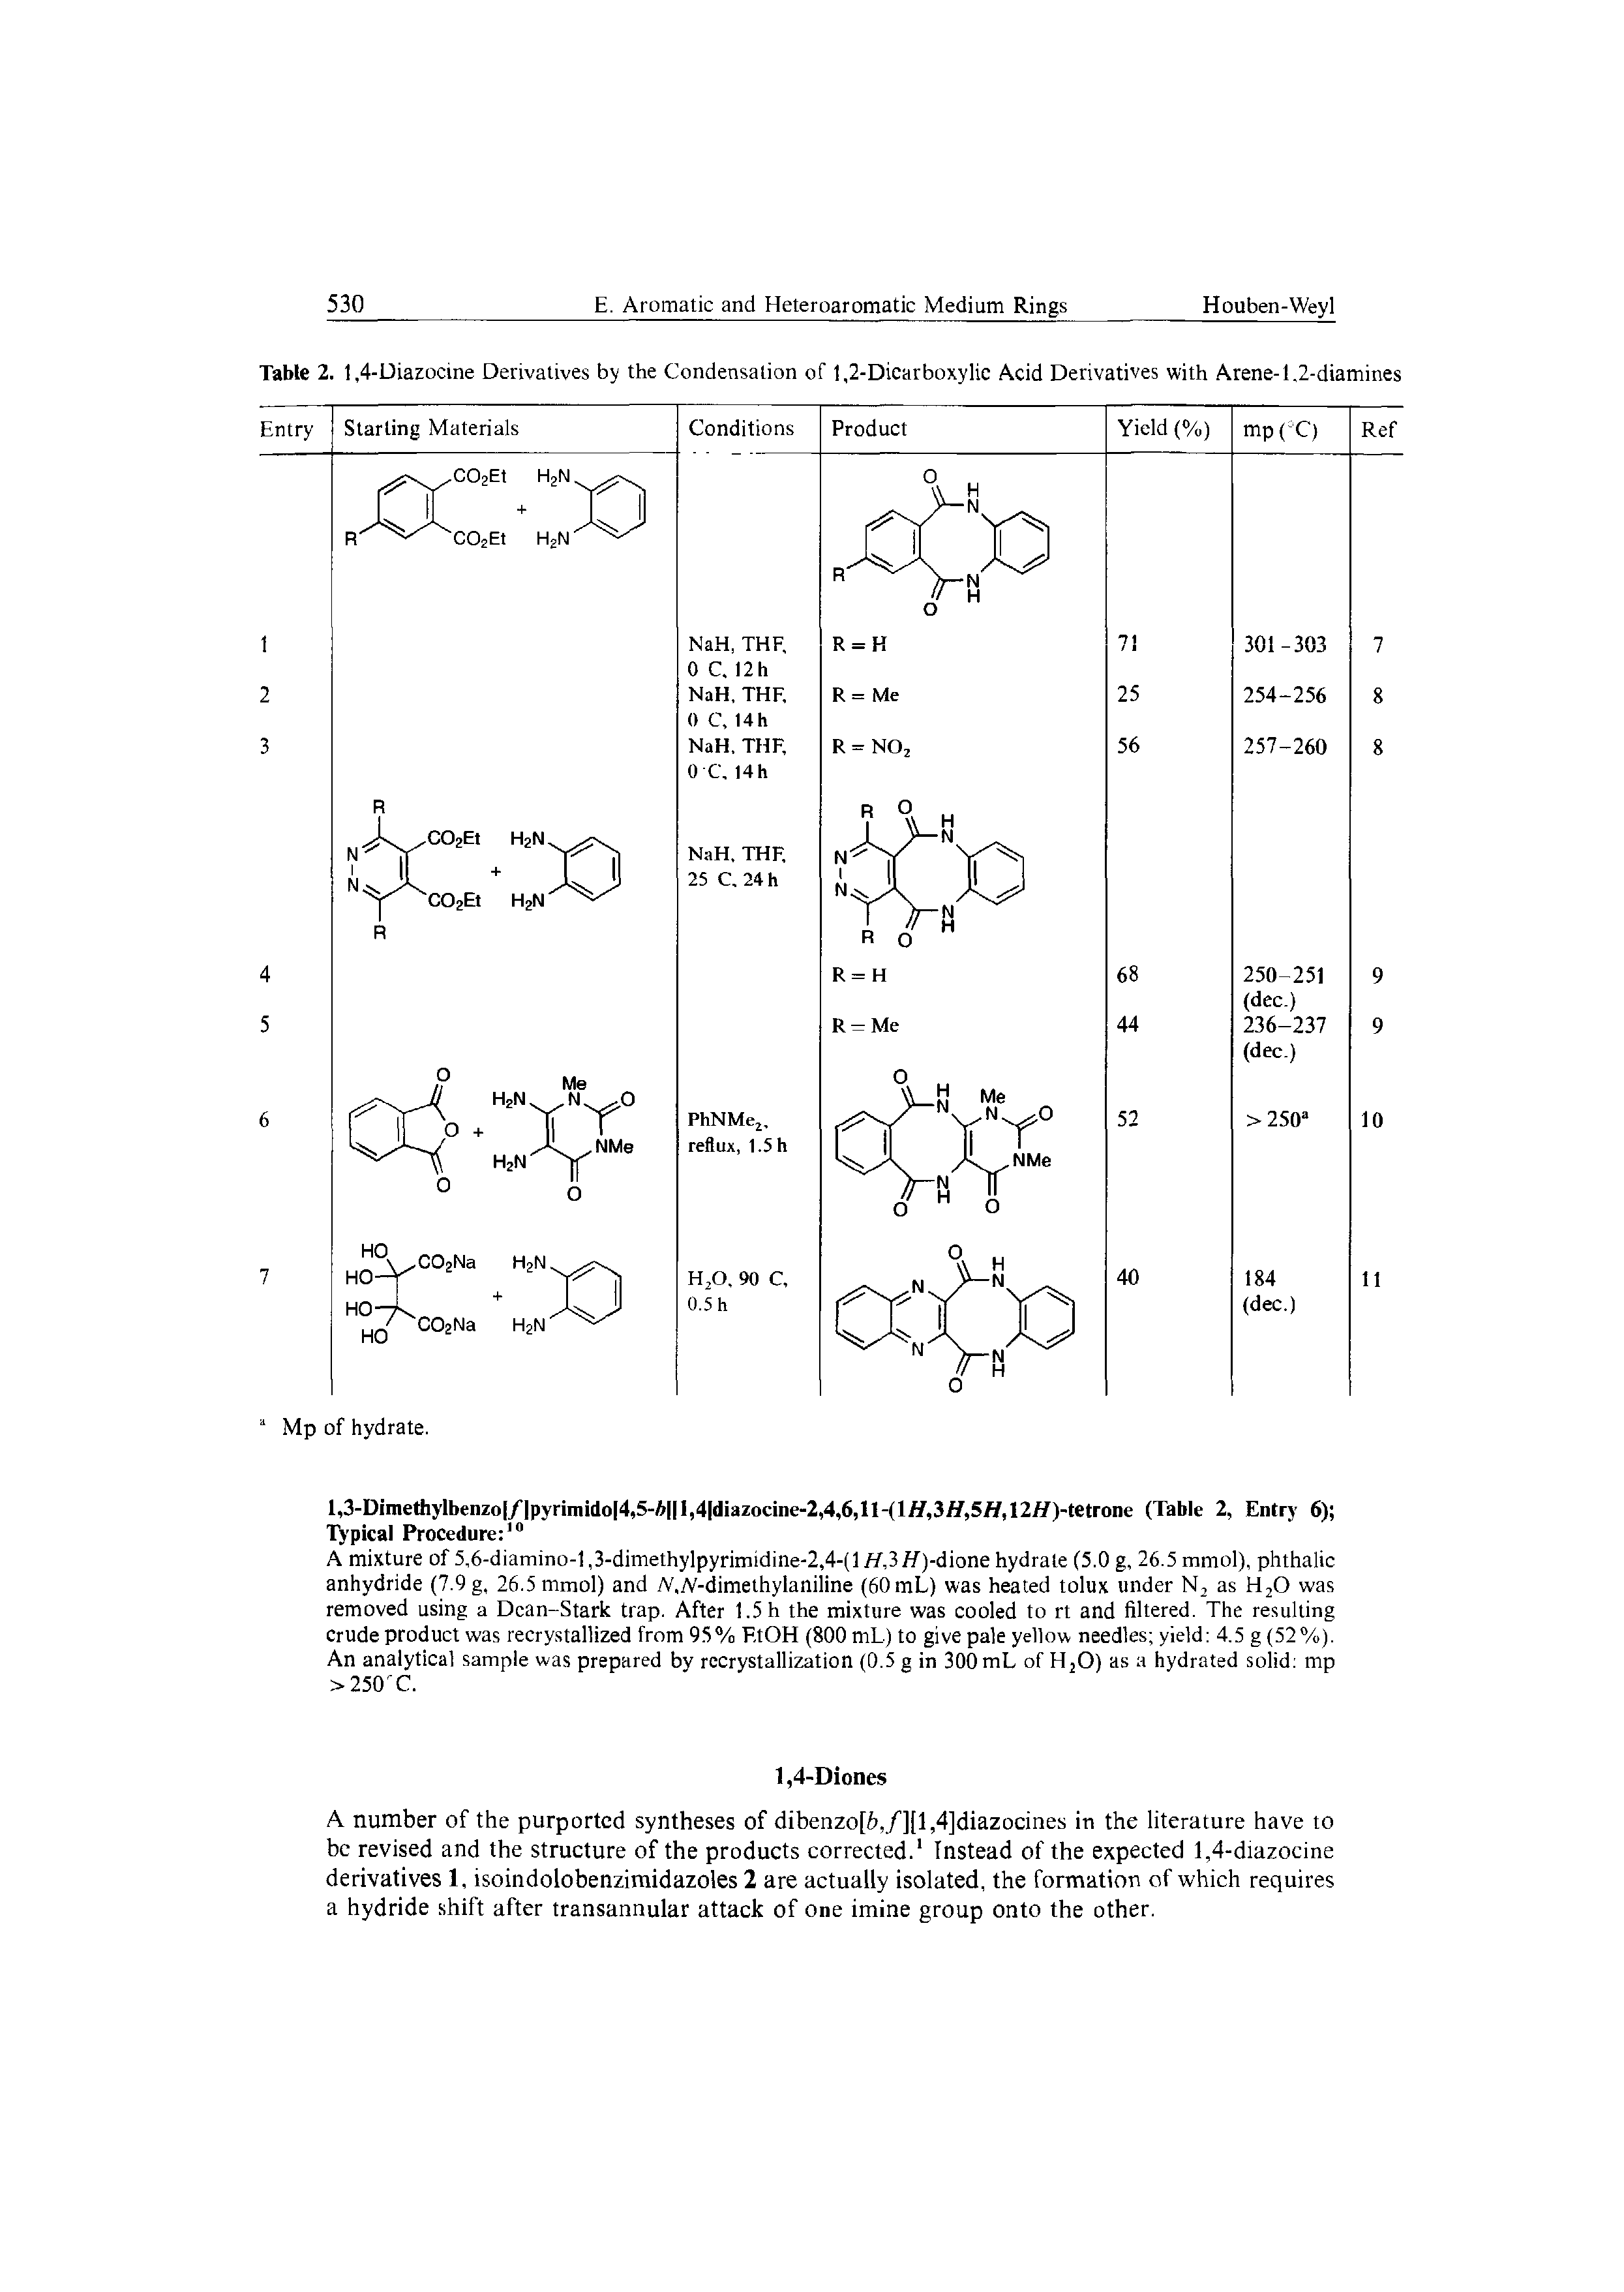 Table 2. 1,4-Diazocine Derivatives by the Condensation of 1,2-Dicarboxylic Acid Derivatives with Arene-1.2-diamines...